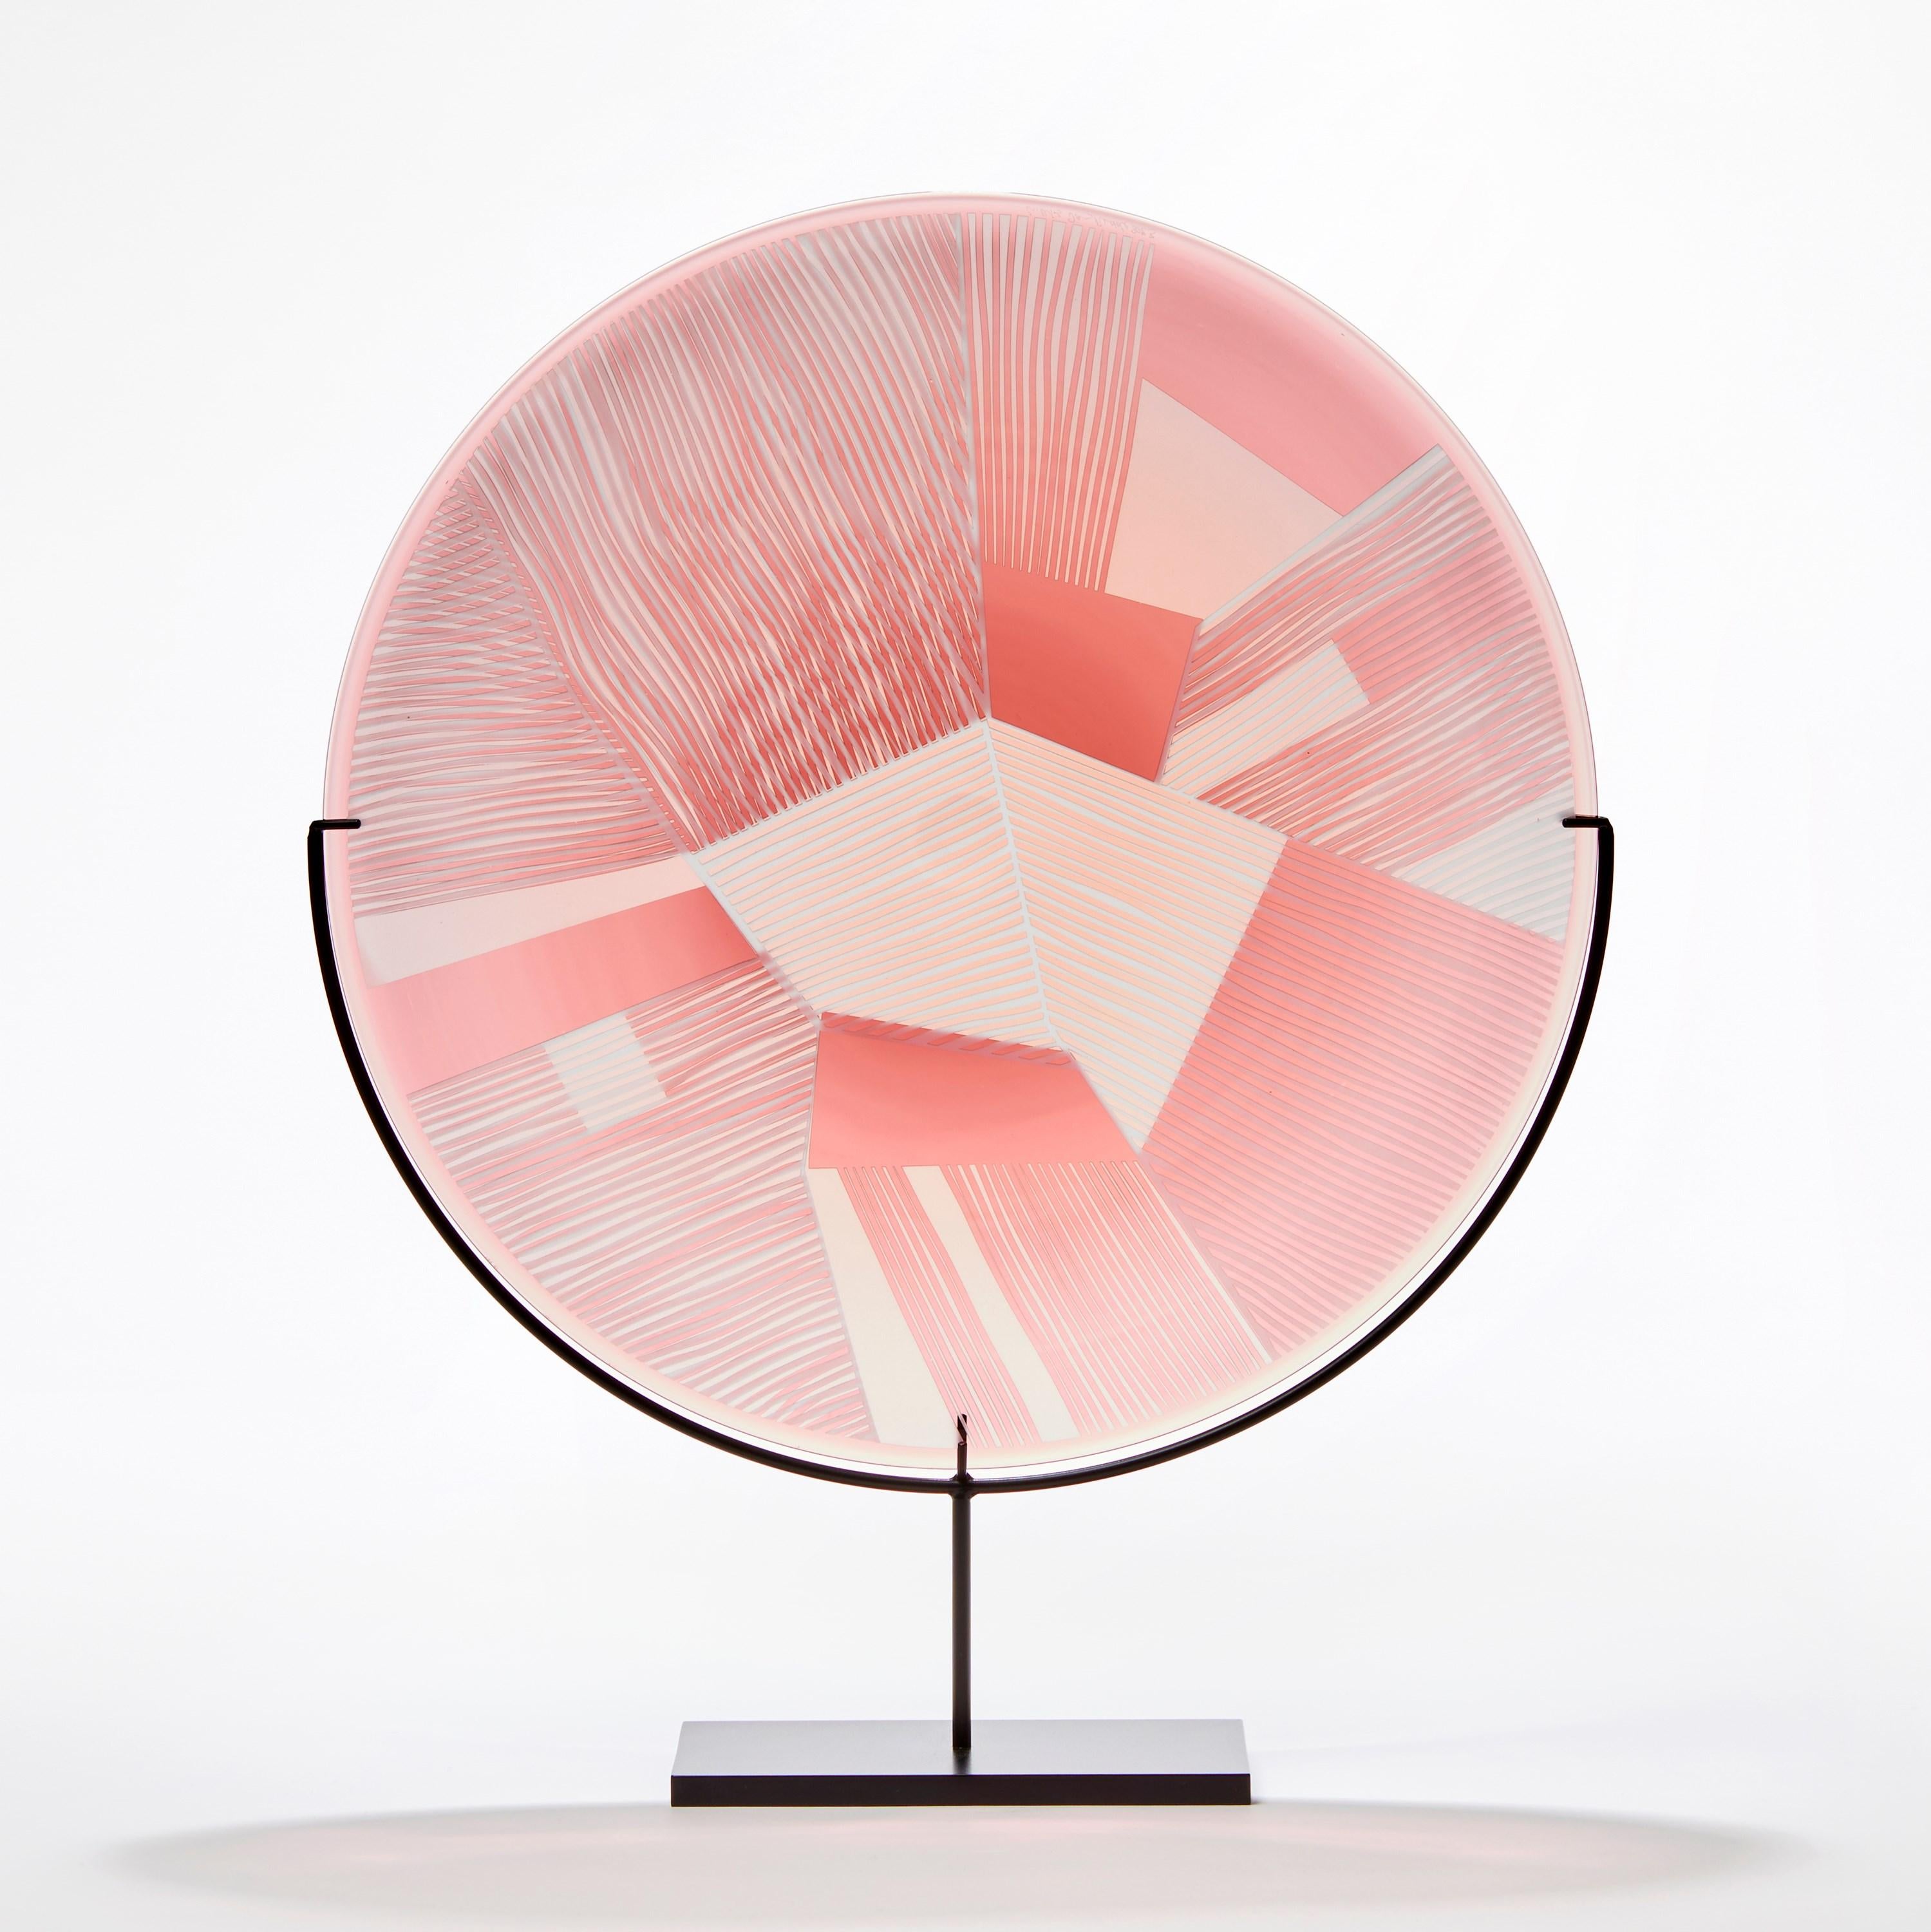 'Overlay Fields in Heliotrope over Pink' is a unique handblown and cut glass artwork by the British artist, Kate Jones of Gillies Jones.

Created with Stephen Gillies, with whom Jones makes many works in collaboration, these exquisite sculptural